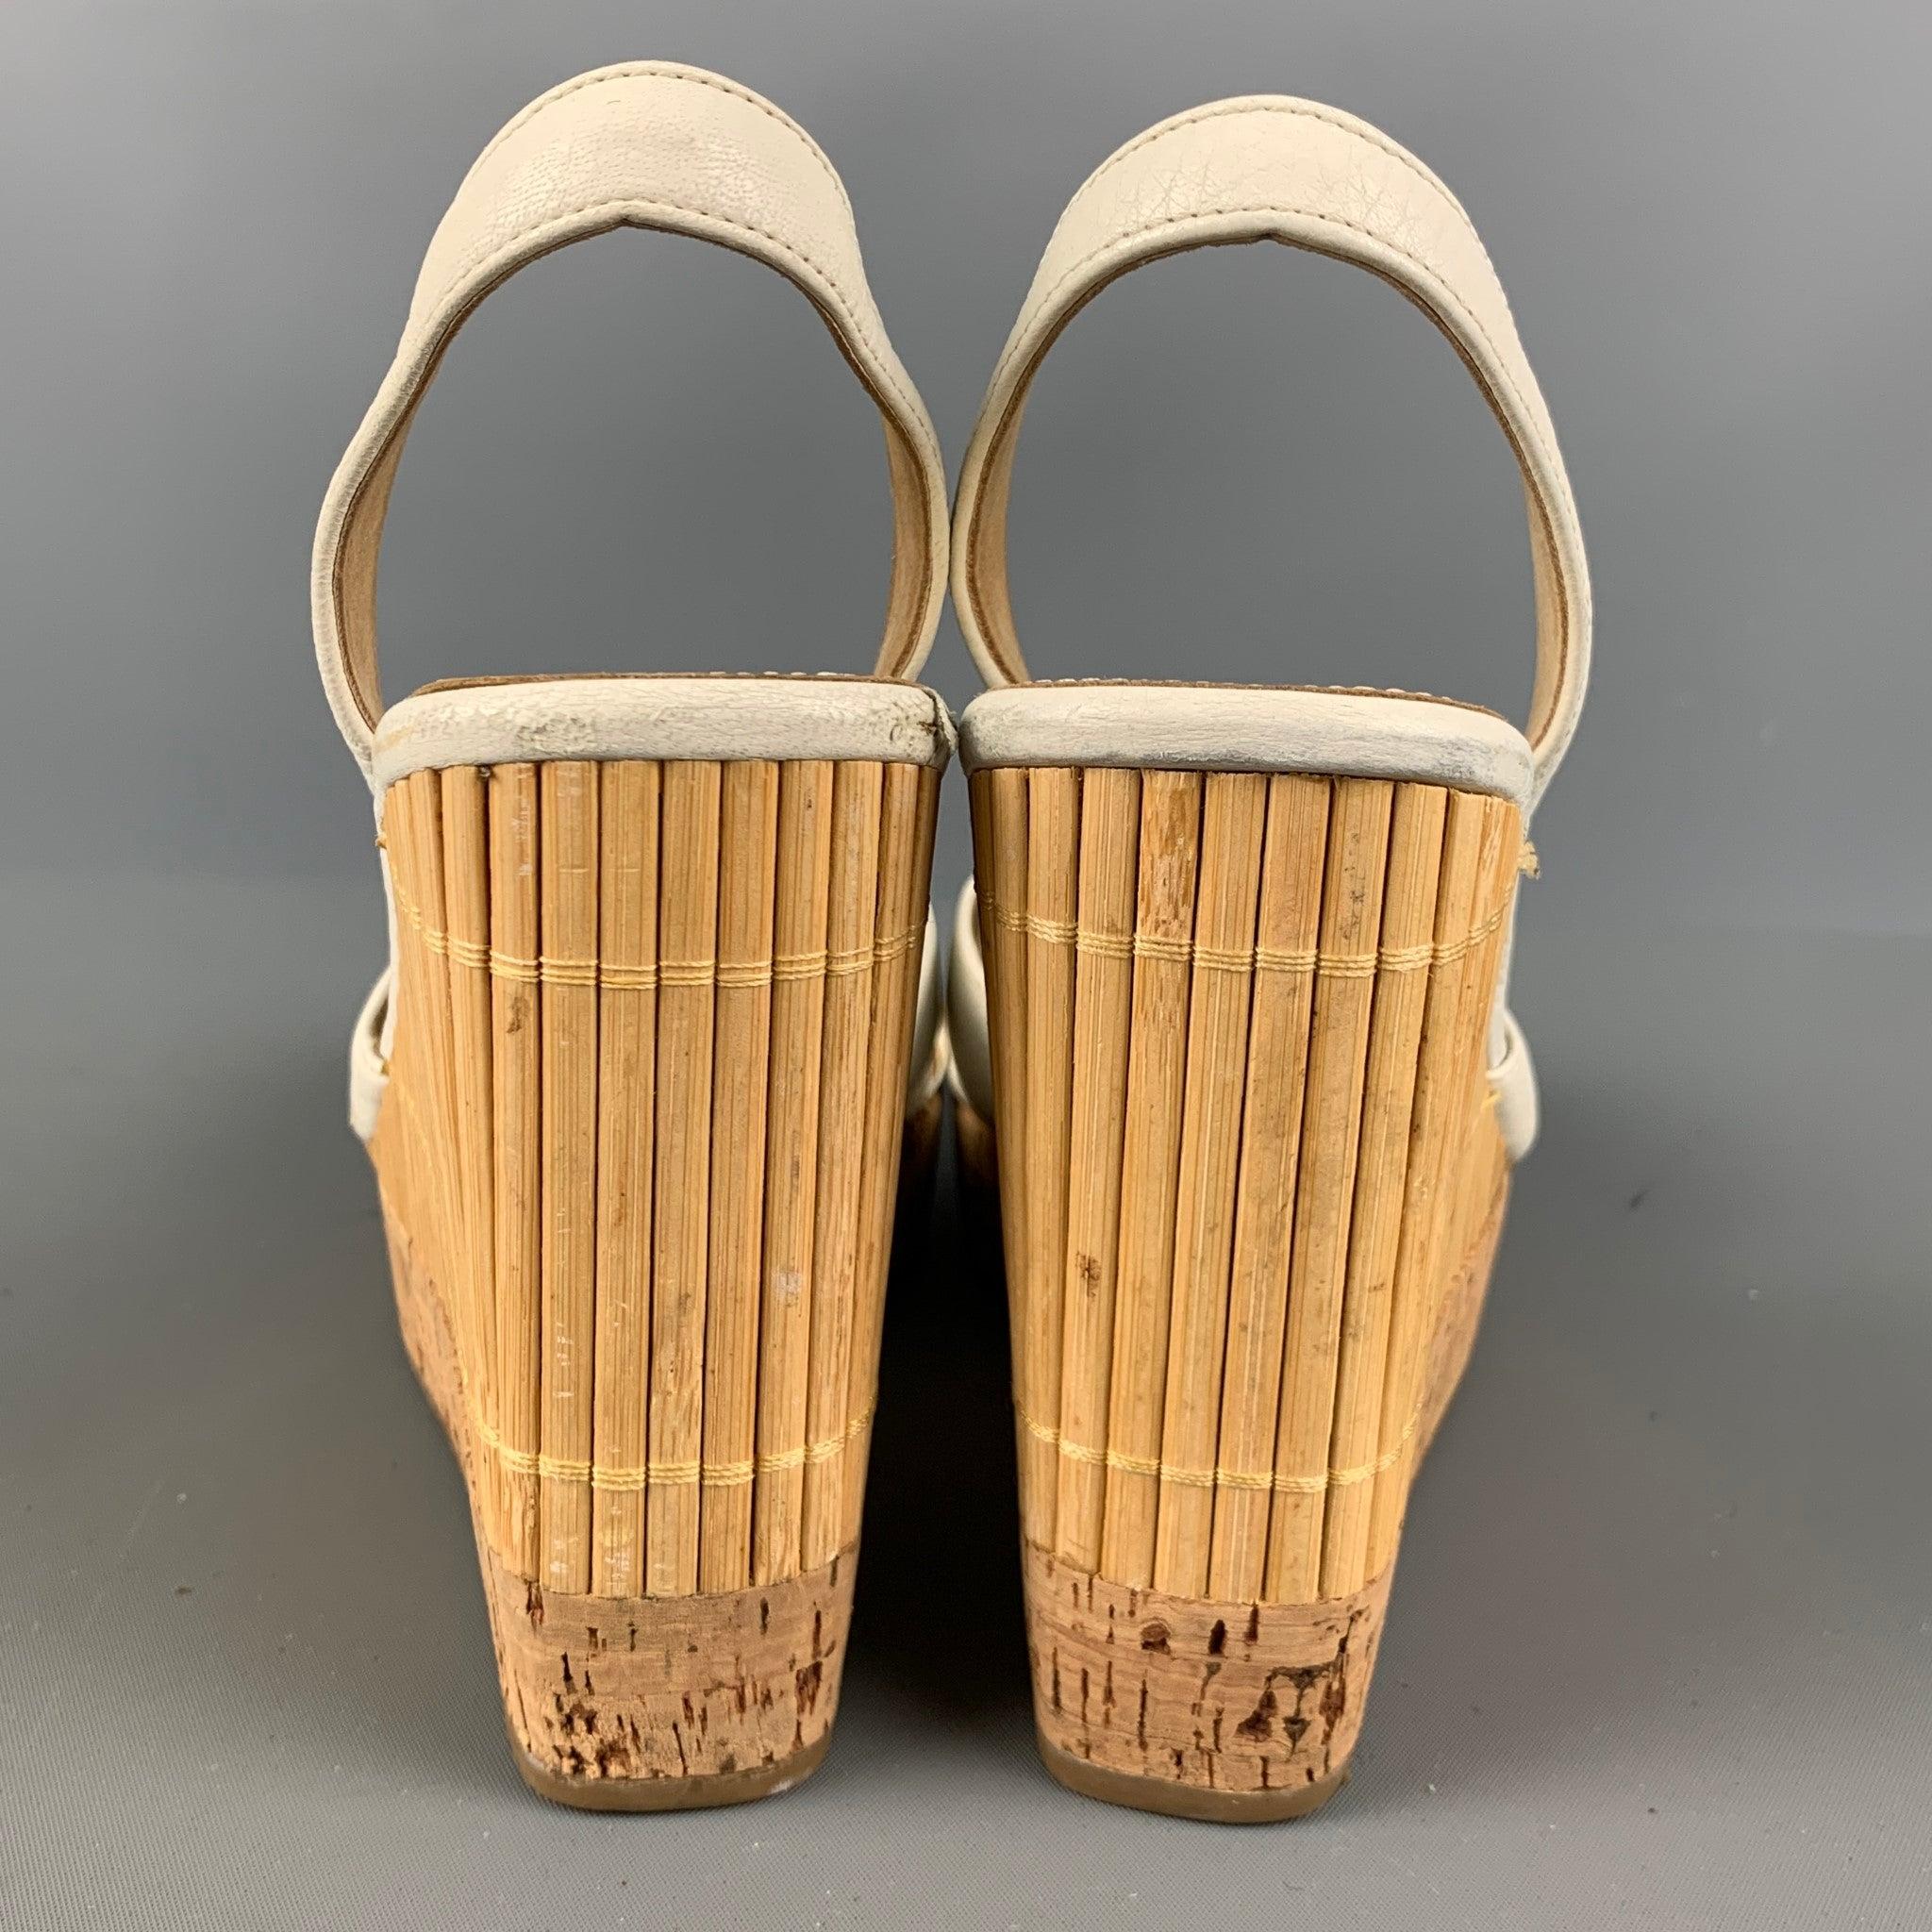 PRADA Size 6 Cream Beige Bamboo Leather Slingback Sandals In Good Condition For Sale In San Francisco, CA